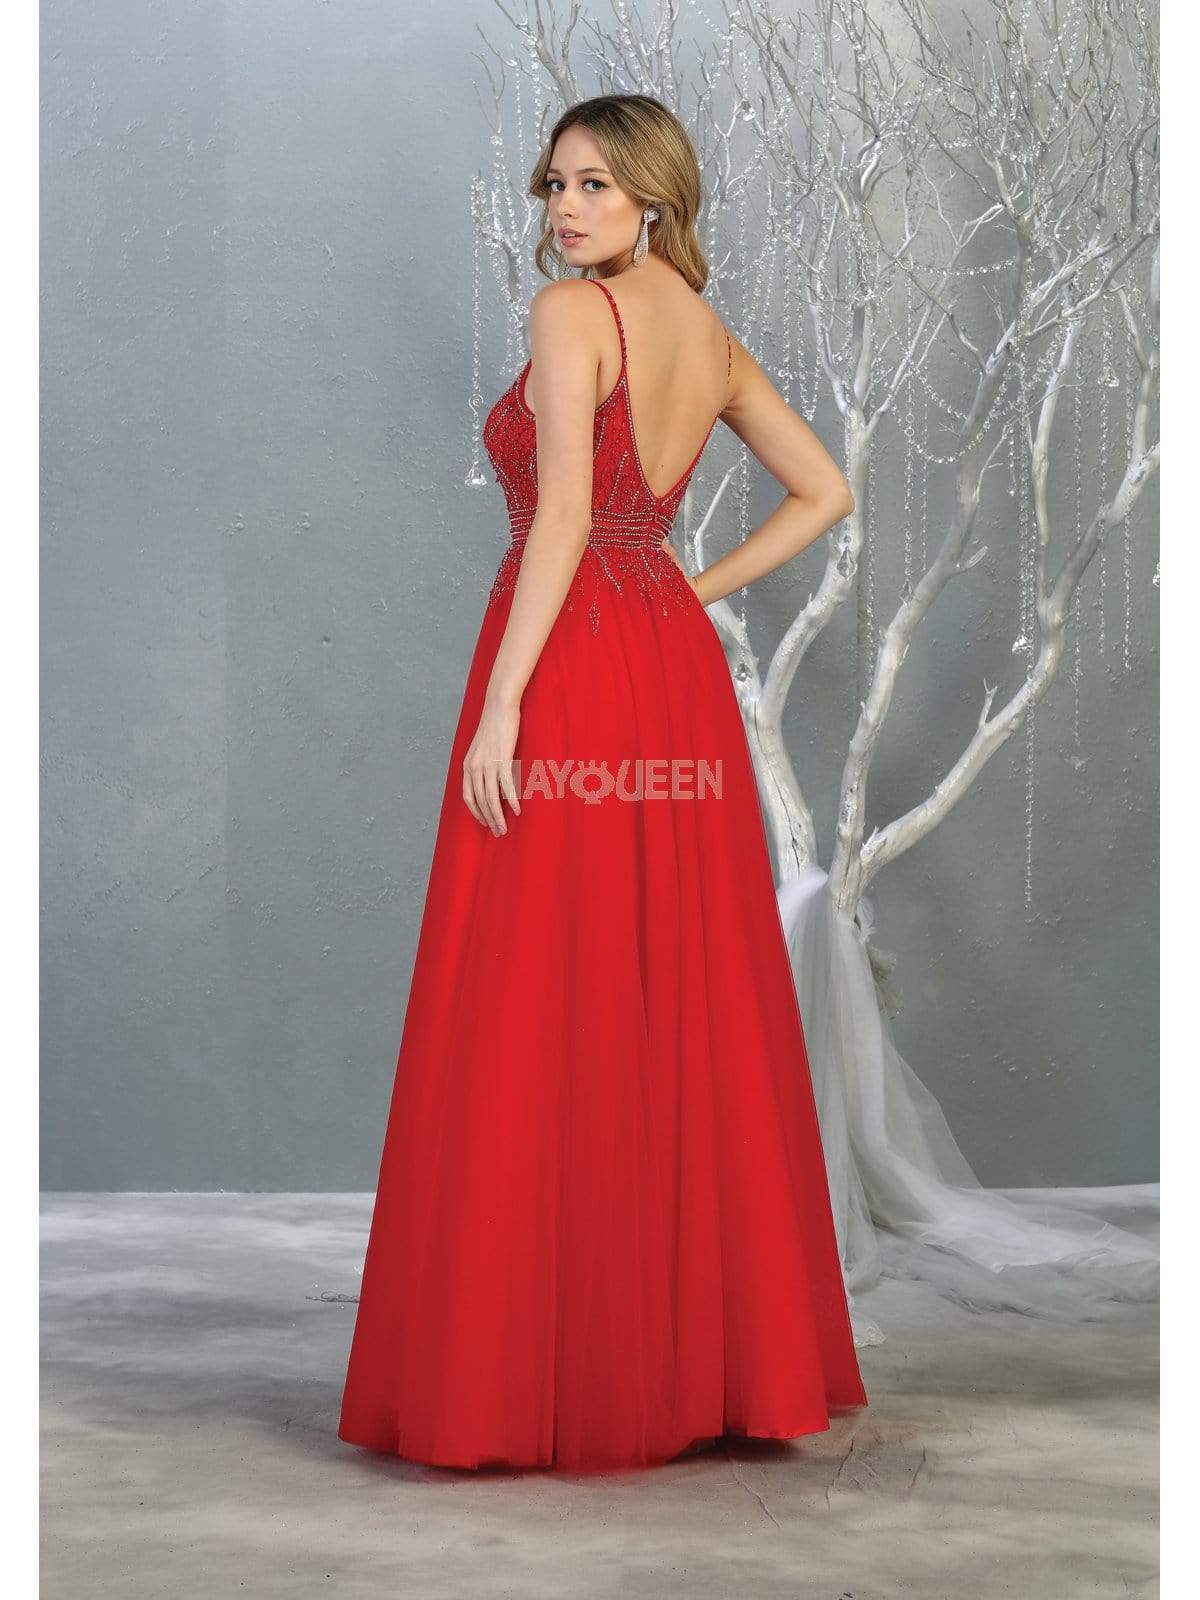 May Queen - RQ7841 Bead Embellished Deep V-Neck A-Line Dress Prom Dresses